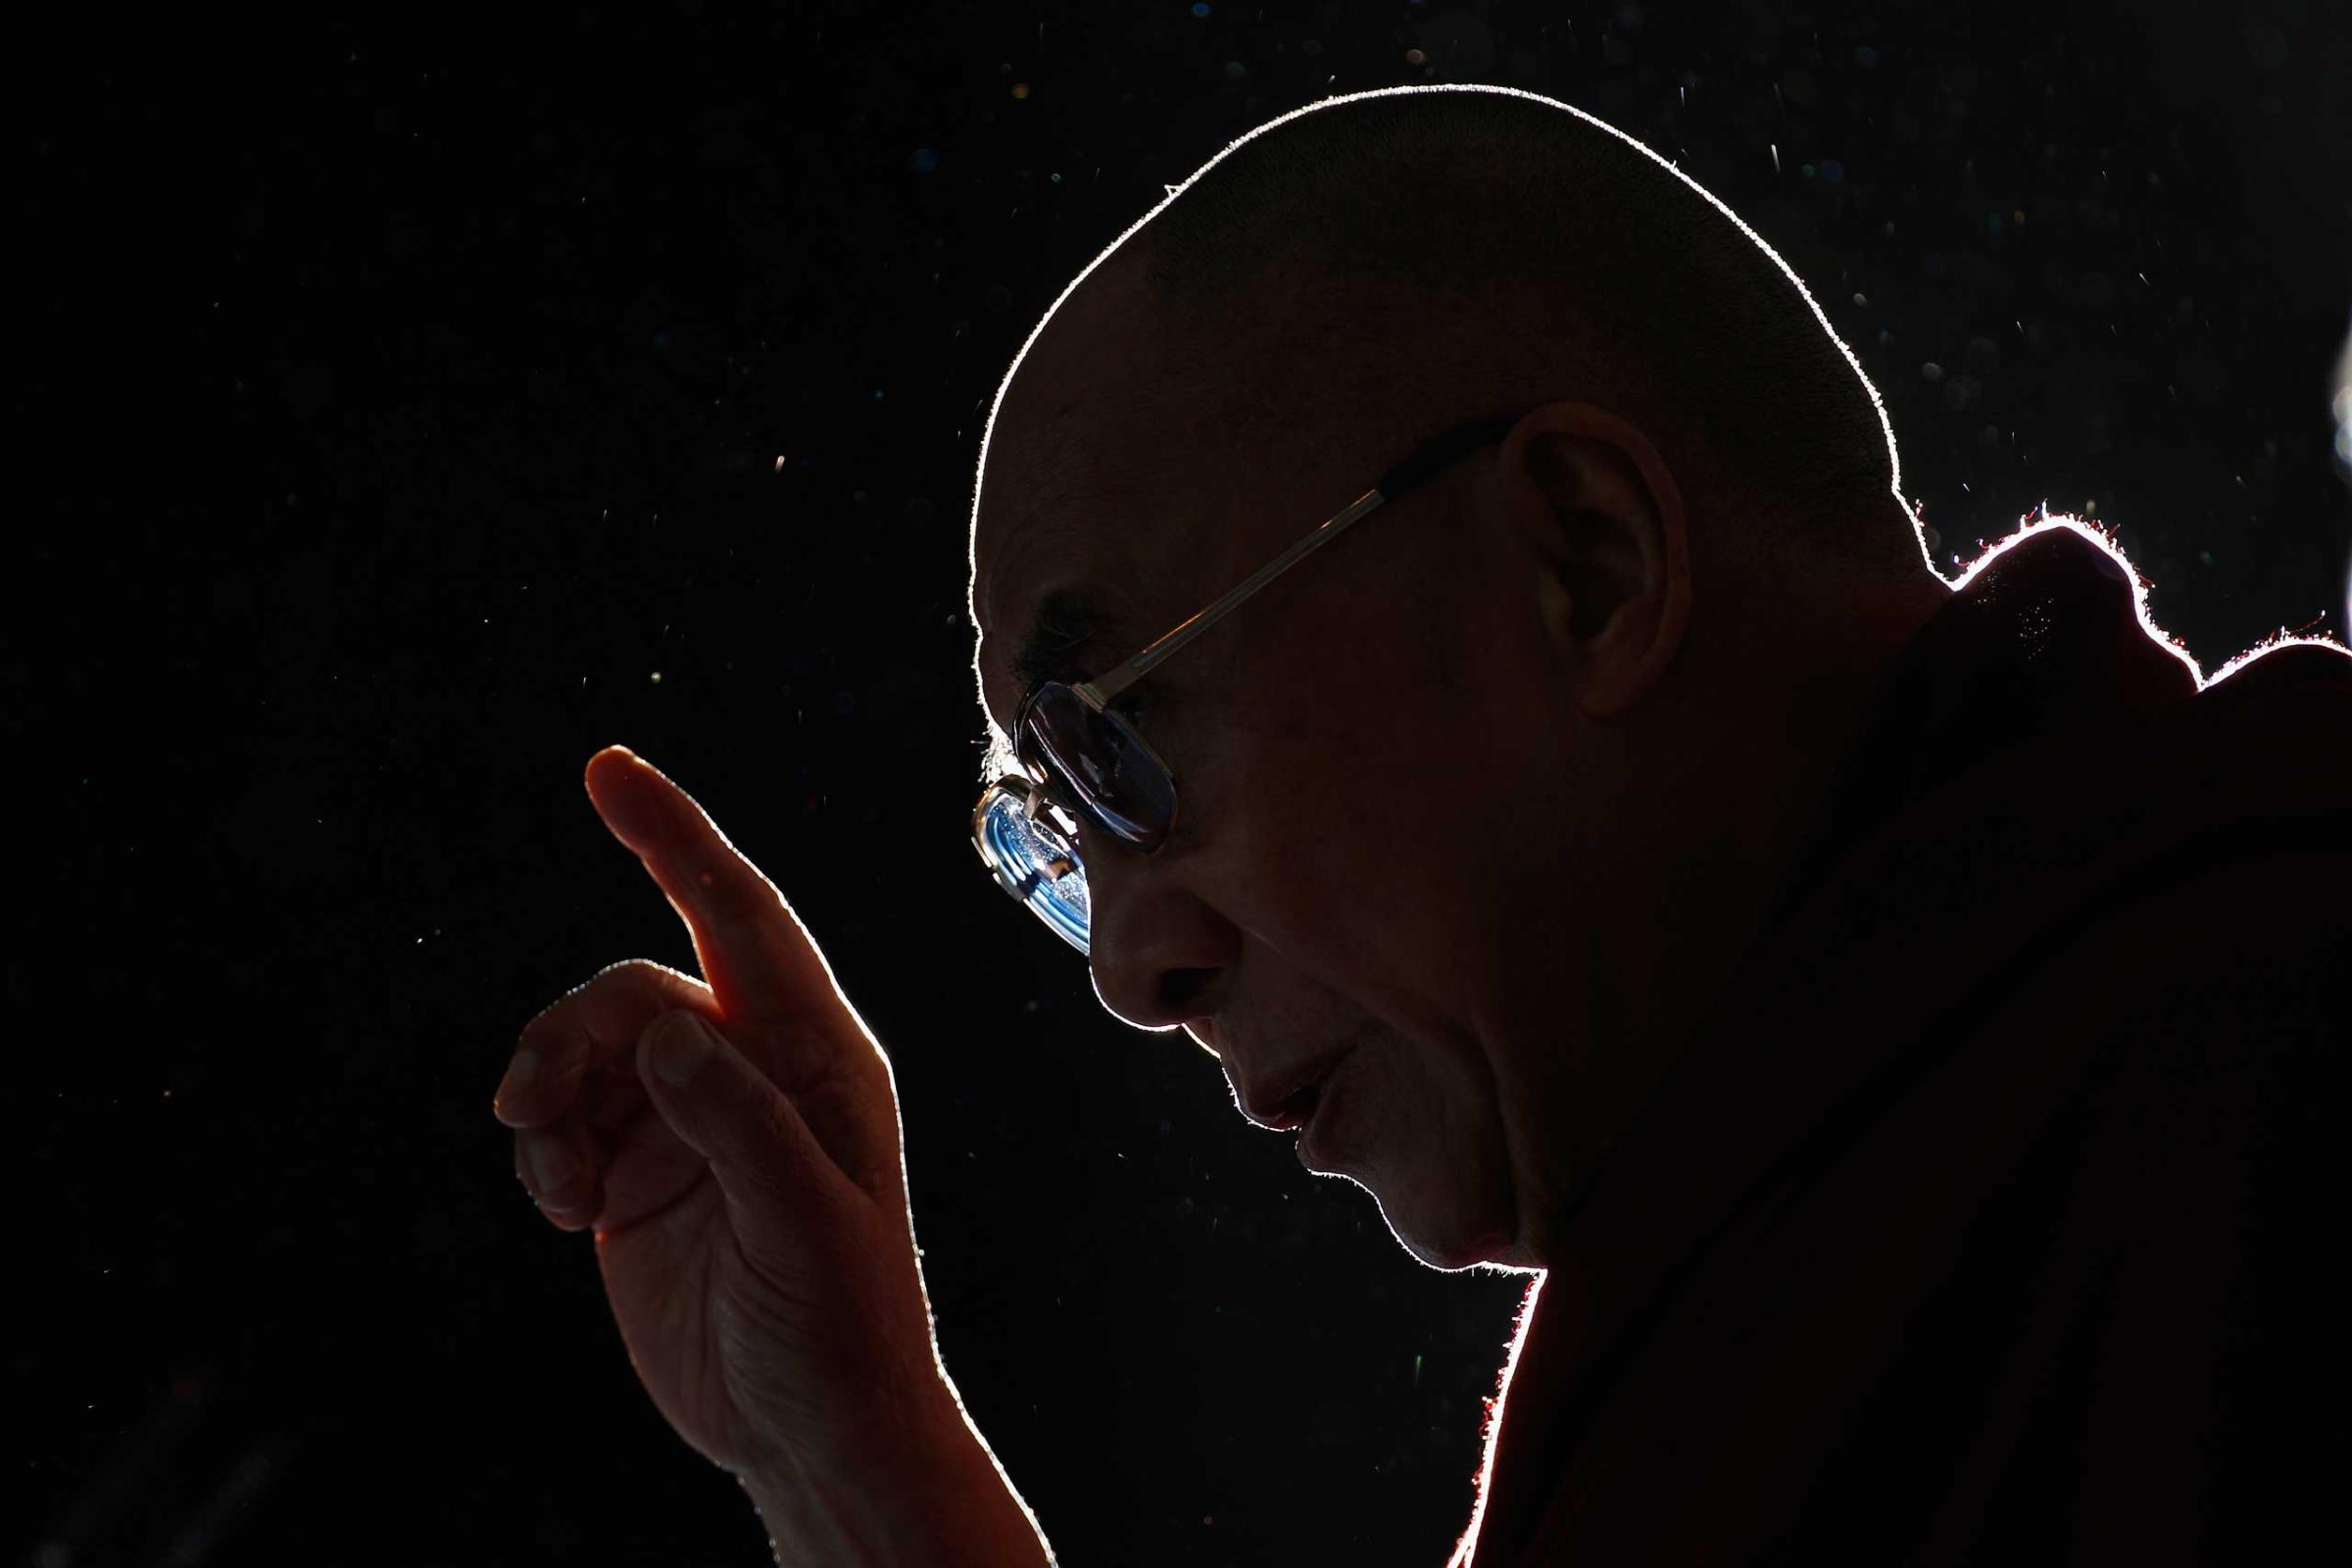 His Holiness the Dalai Lama during a press conference at The Lowry Hotel in Manchester, United Kingdom, June 2012.